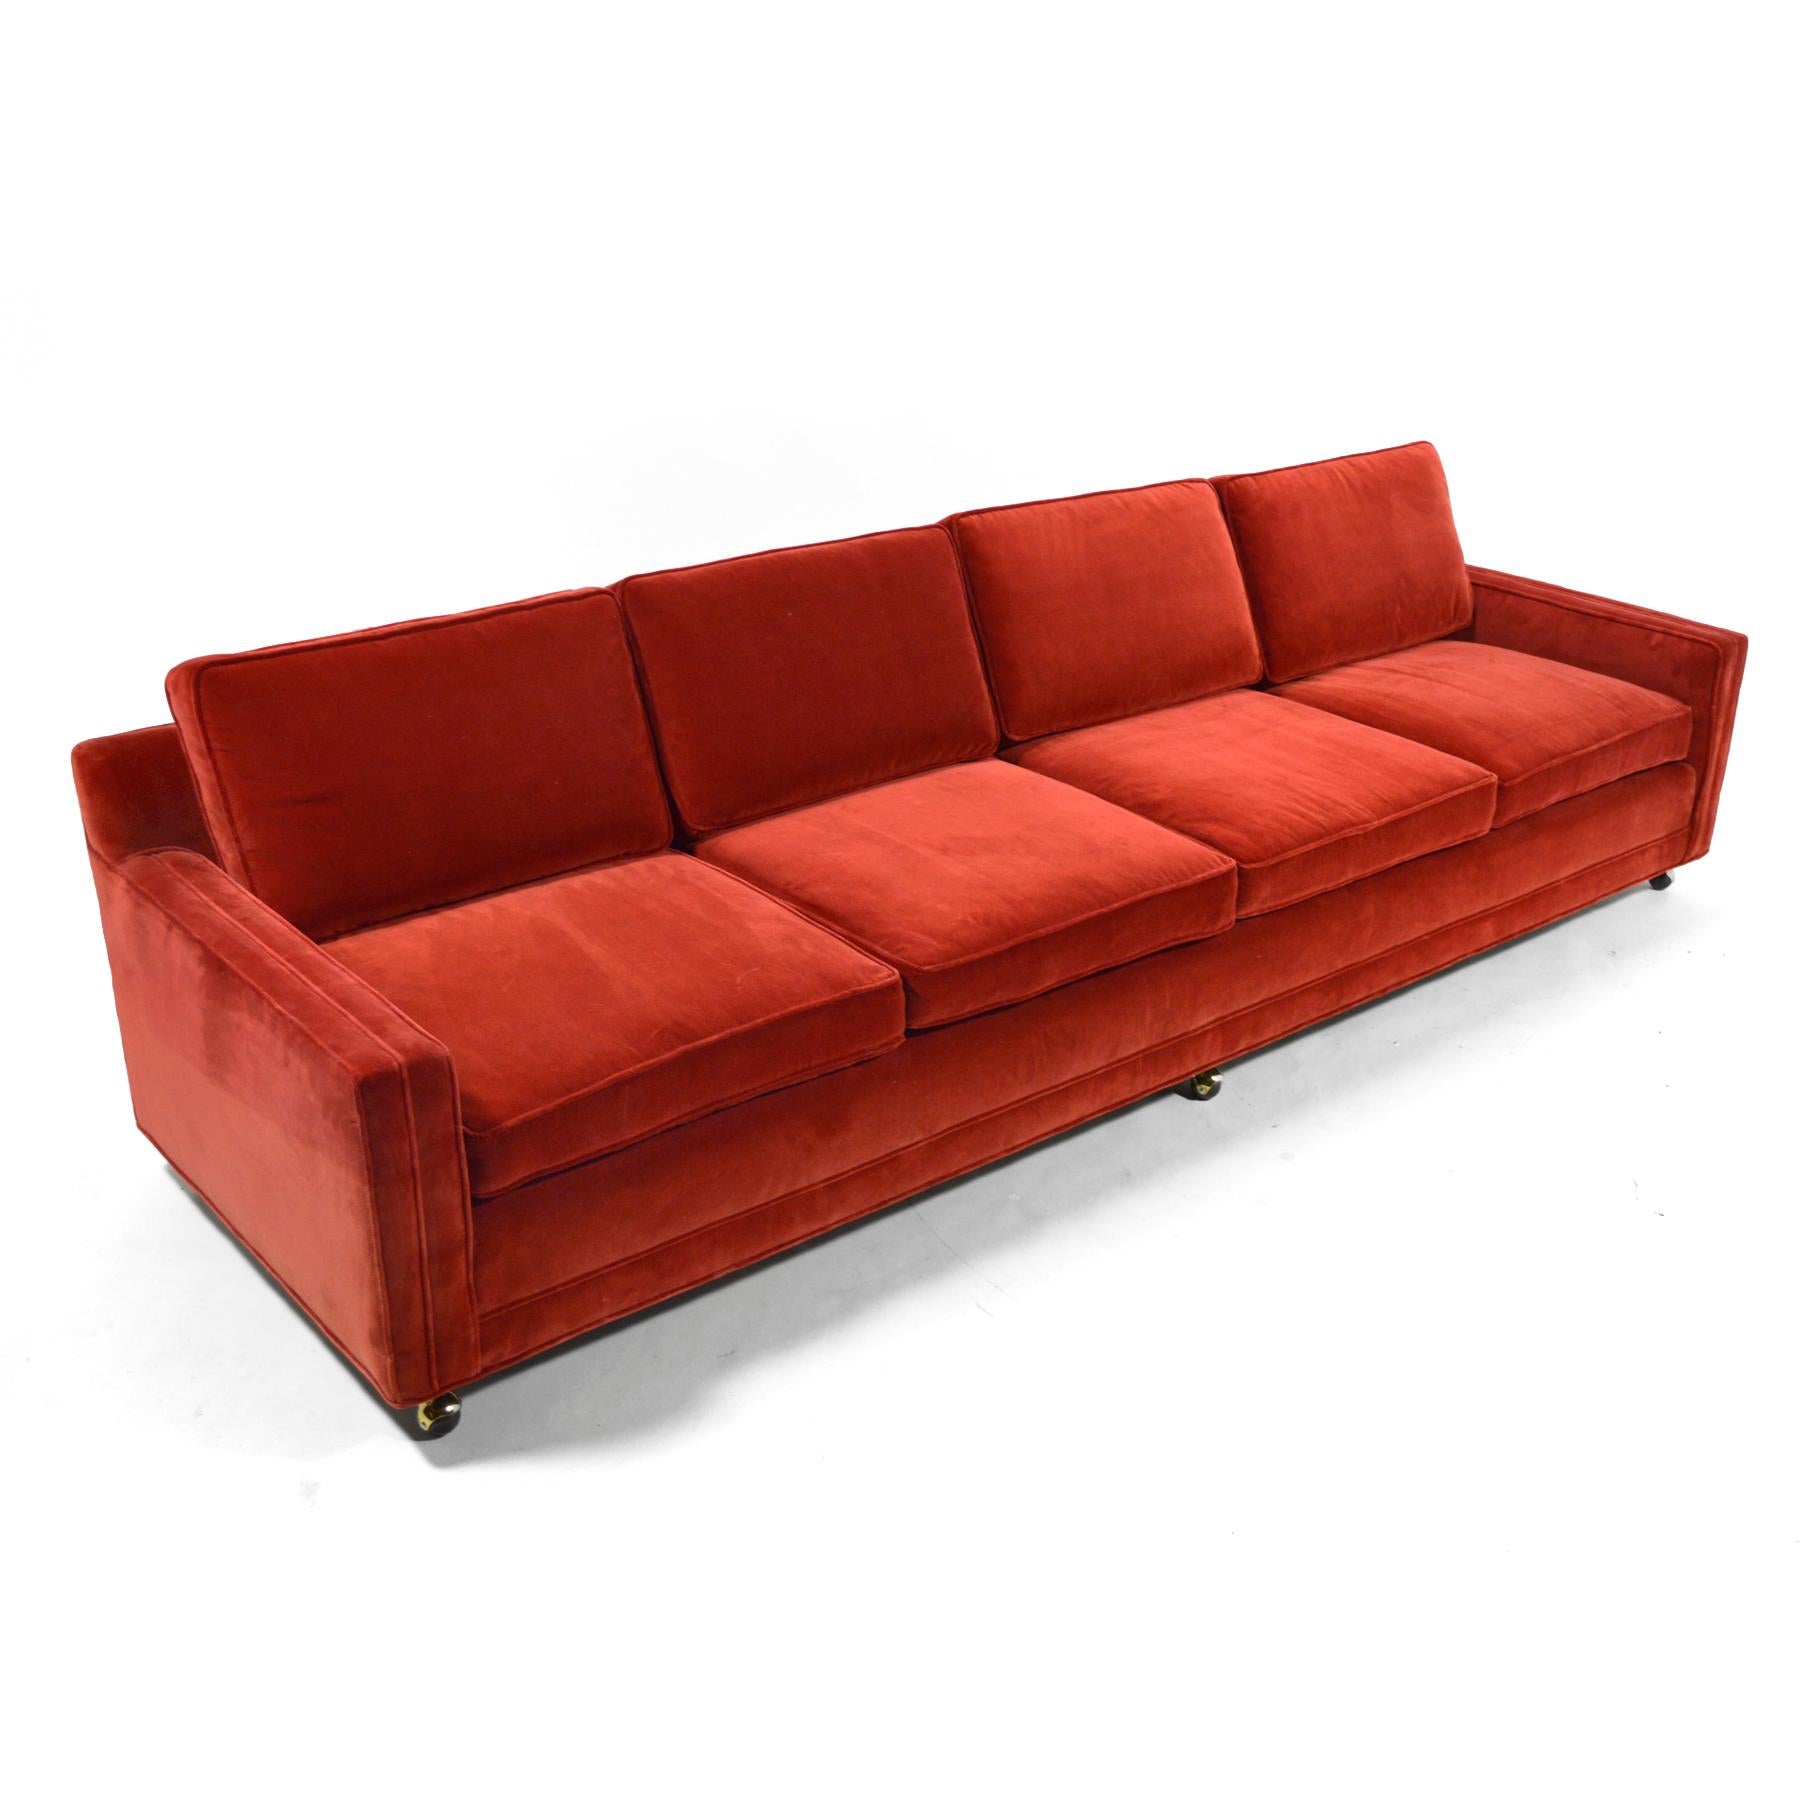 This double arm sofa is Classic Harvey Probber. Impeccably proportioned with great details, the extra long sofa has a timeless rectilinear design with four seats, each with a loose seat and back cushion. It is supported by stubby legs with ball